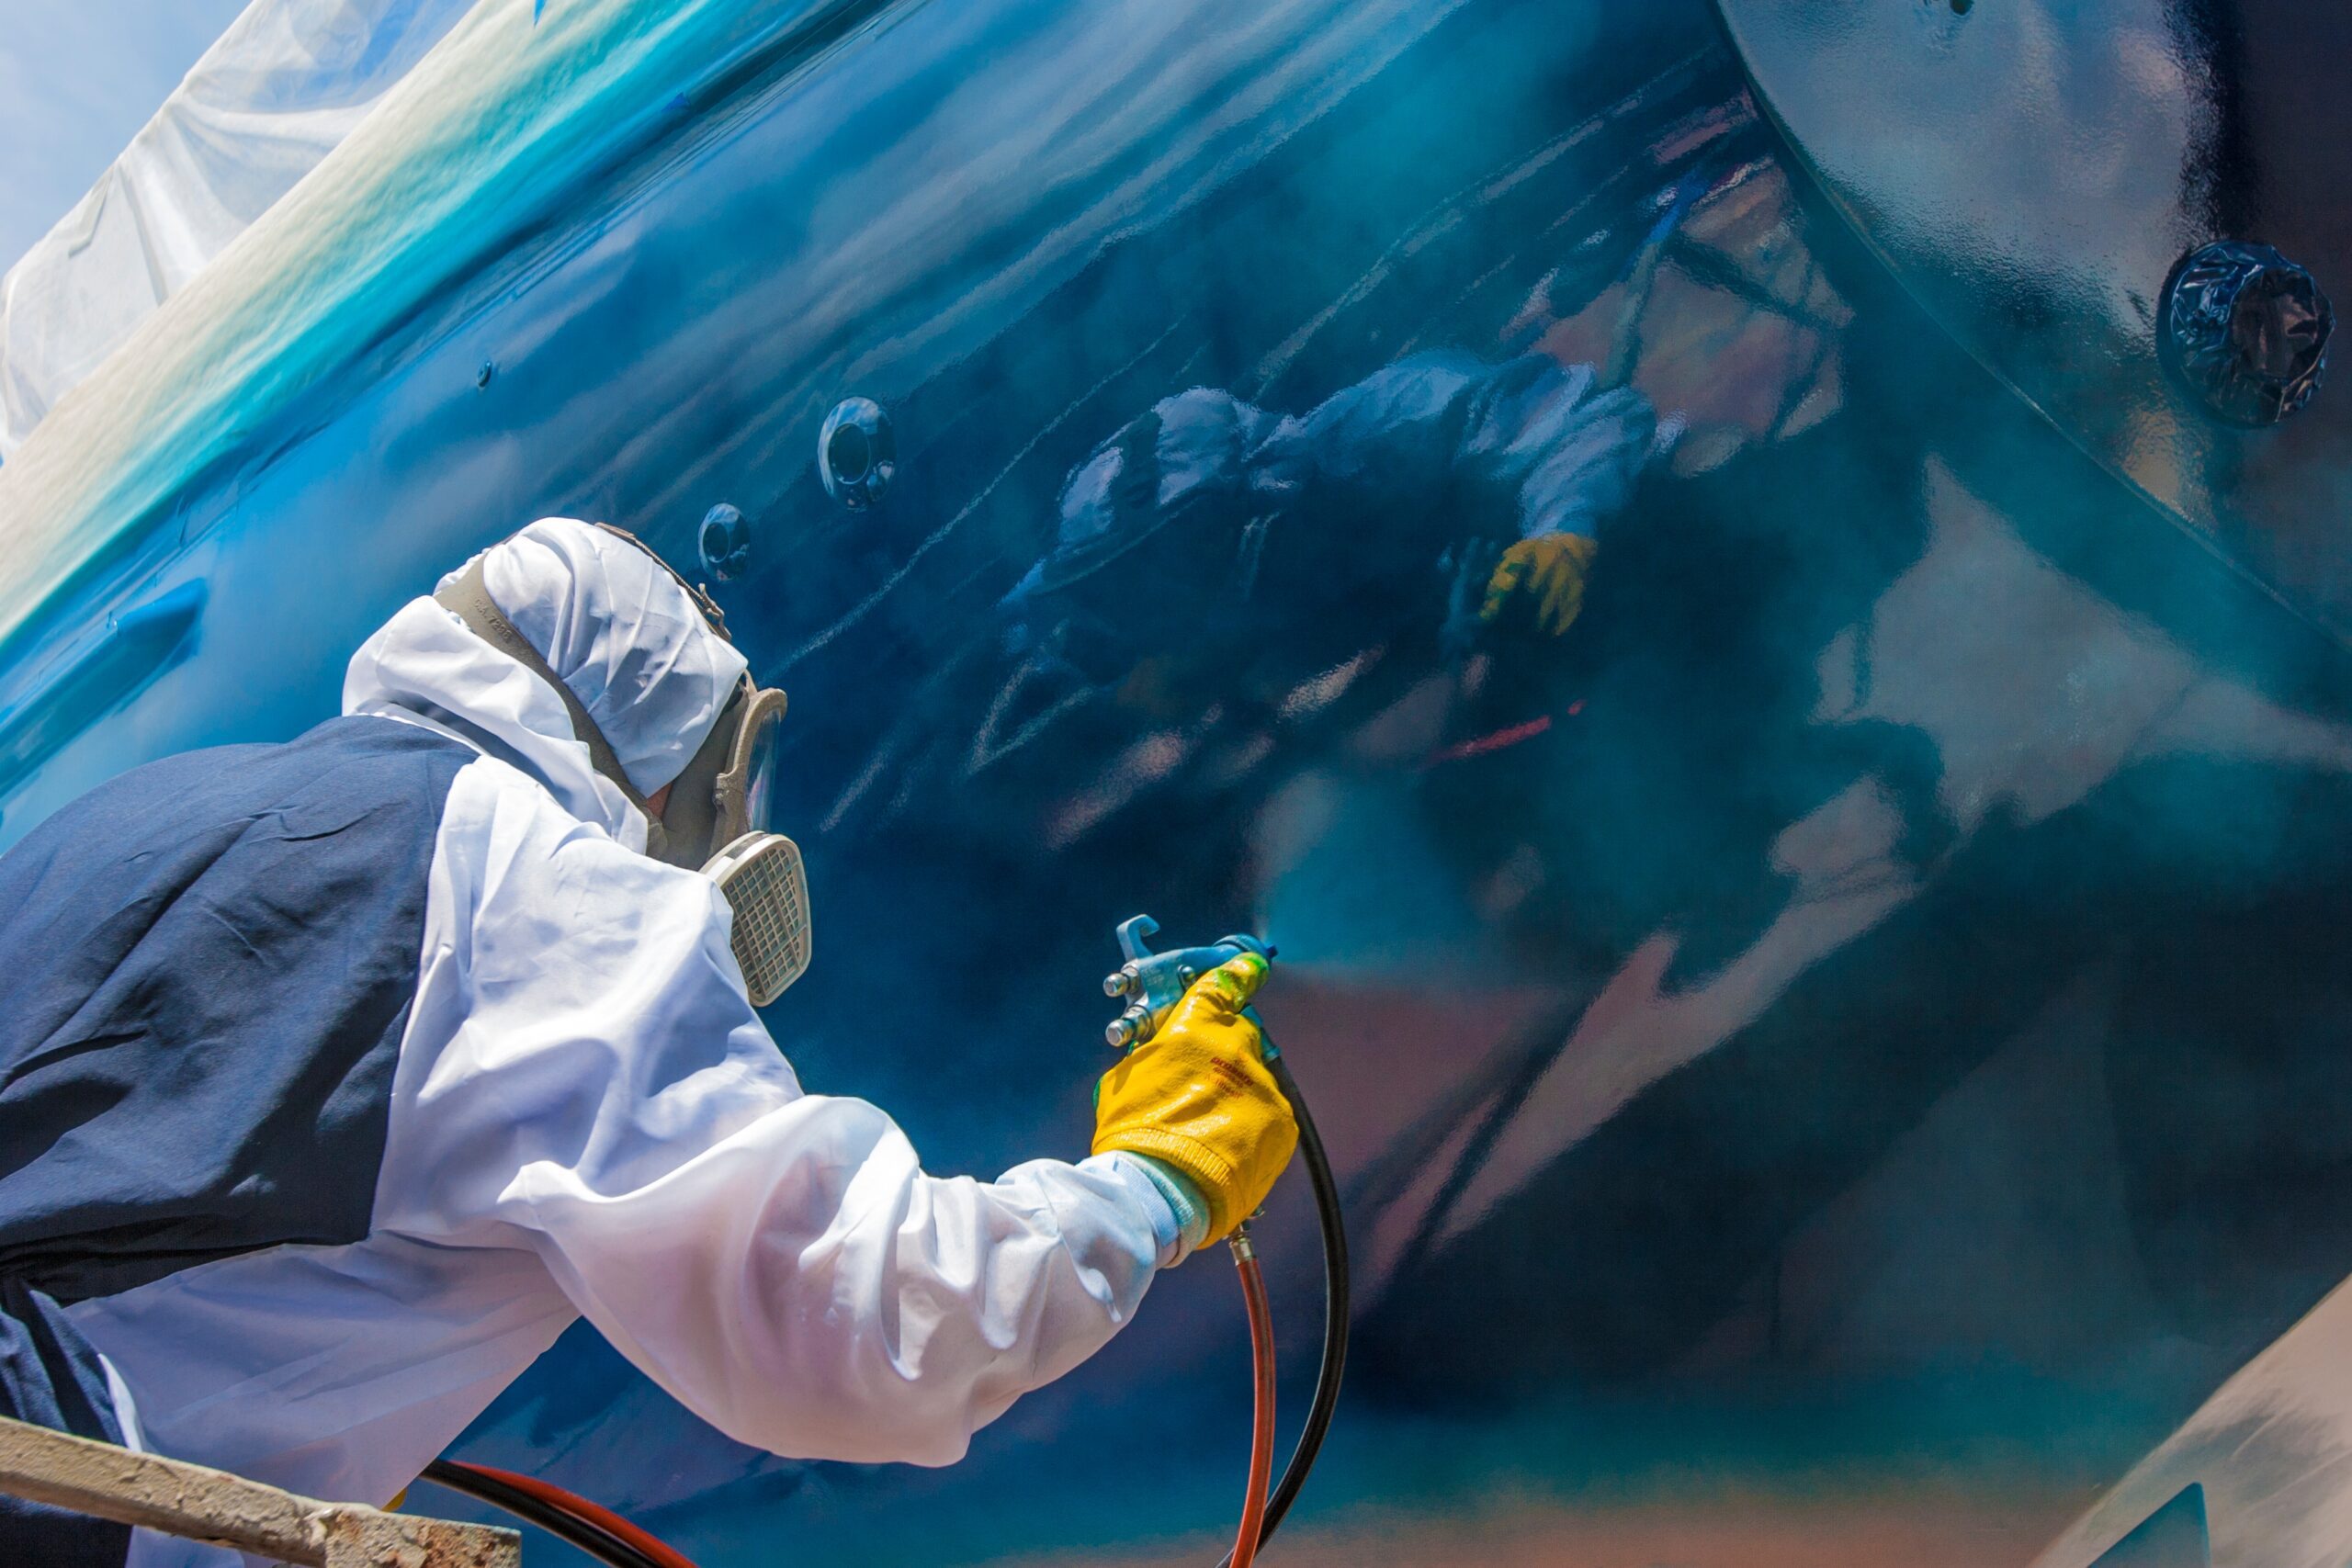 Spray painter with full body protection and mask painting the hull of sailboat with high gloss varnish